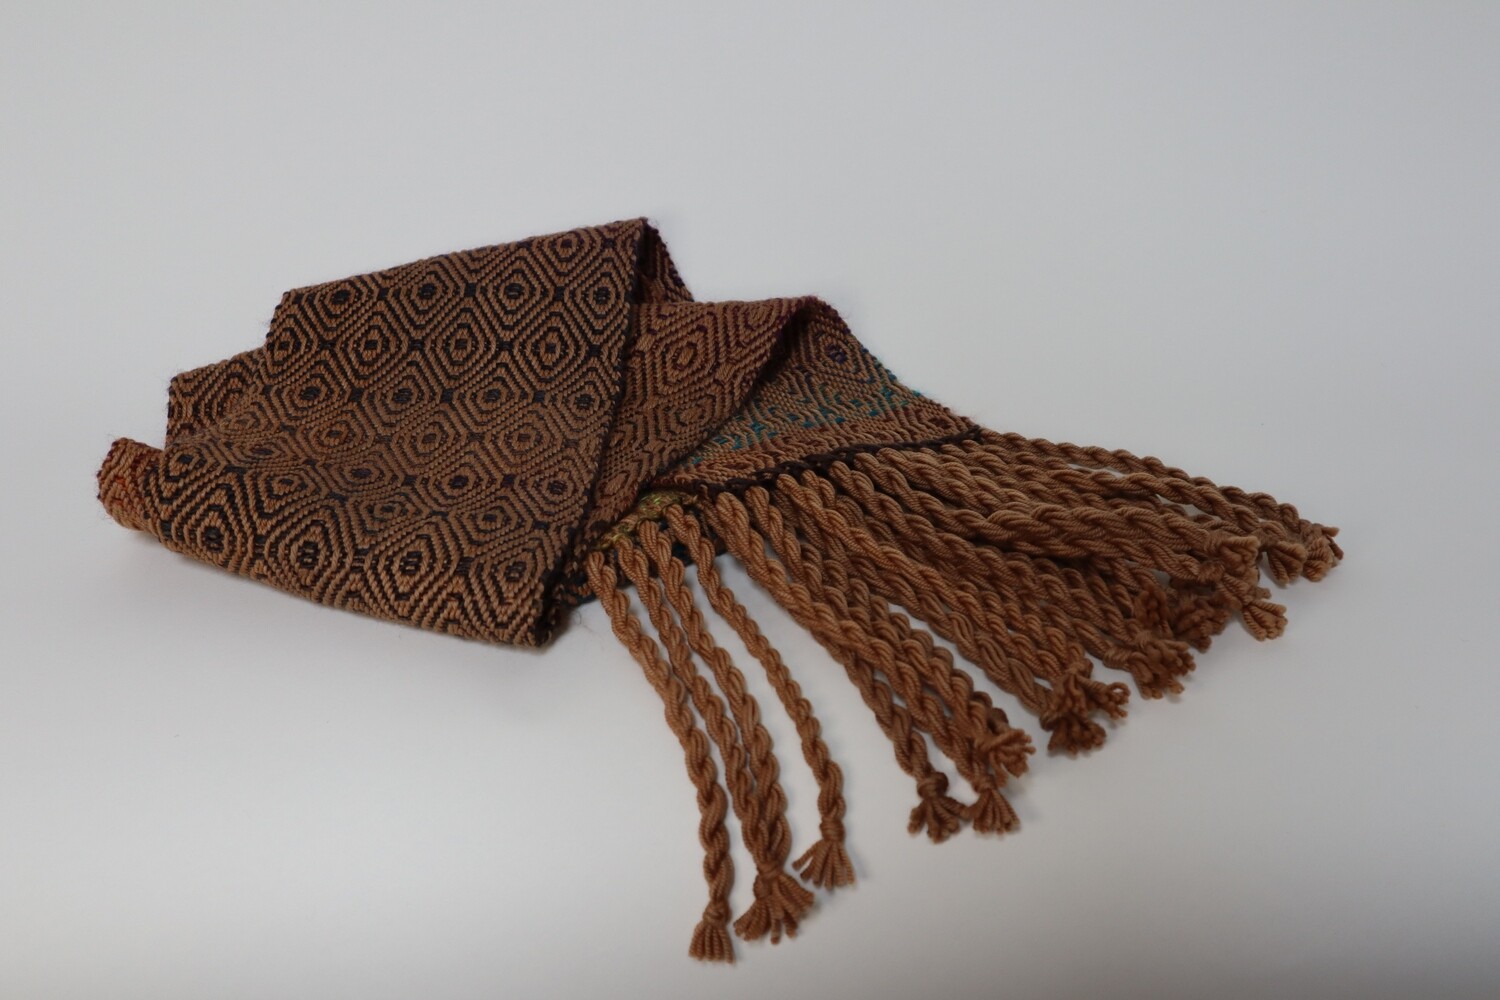 Walnut hull dyed scarf with jewel colored weft